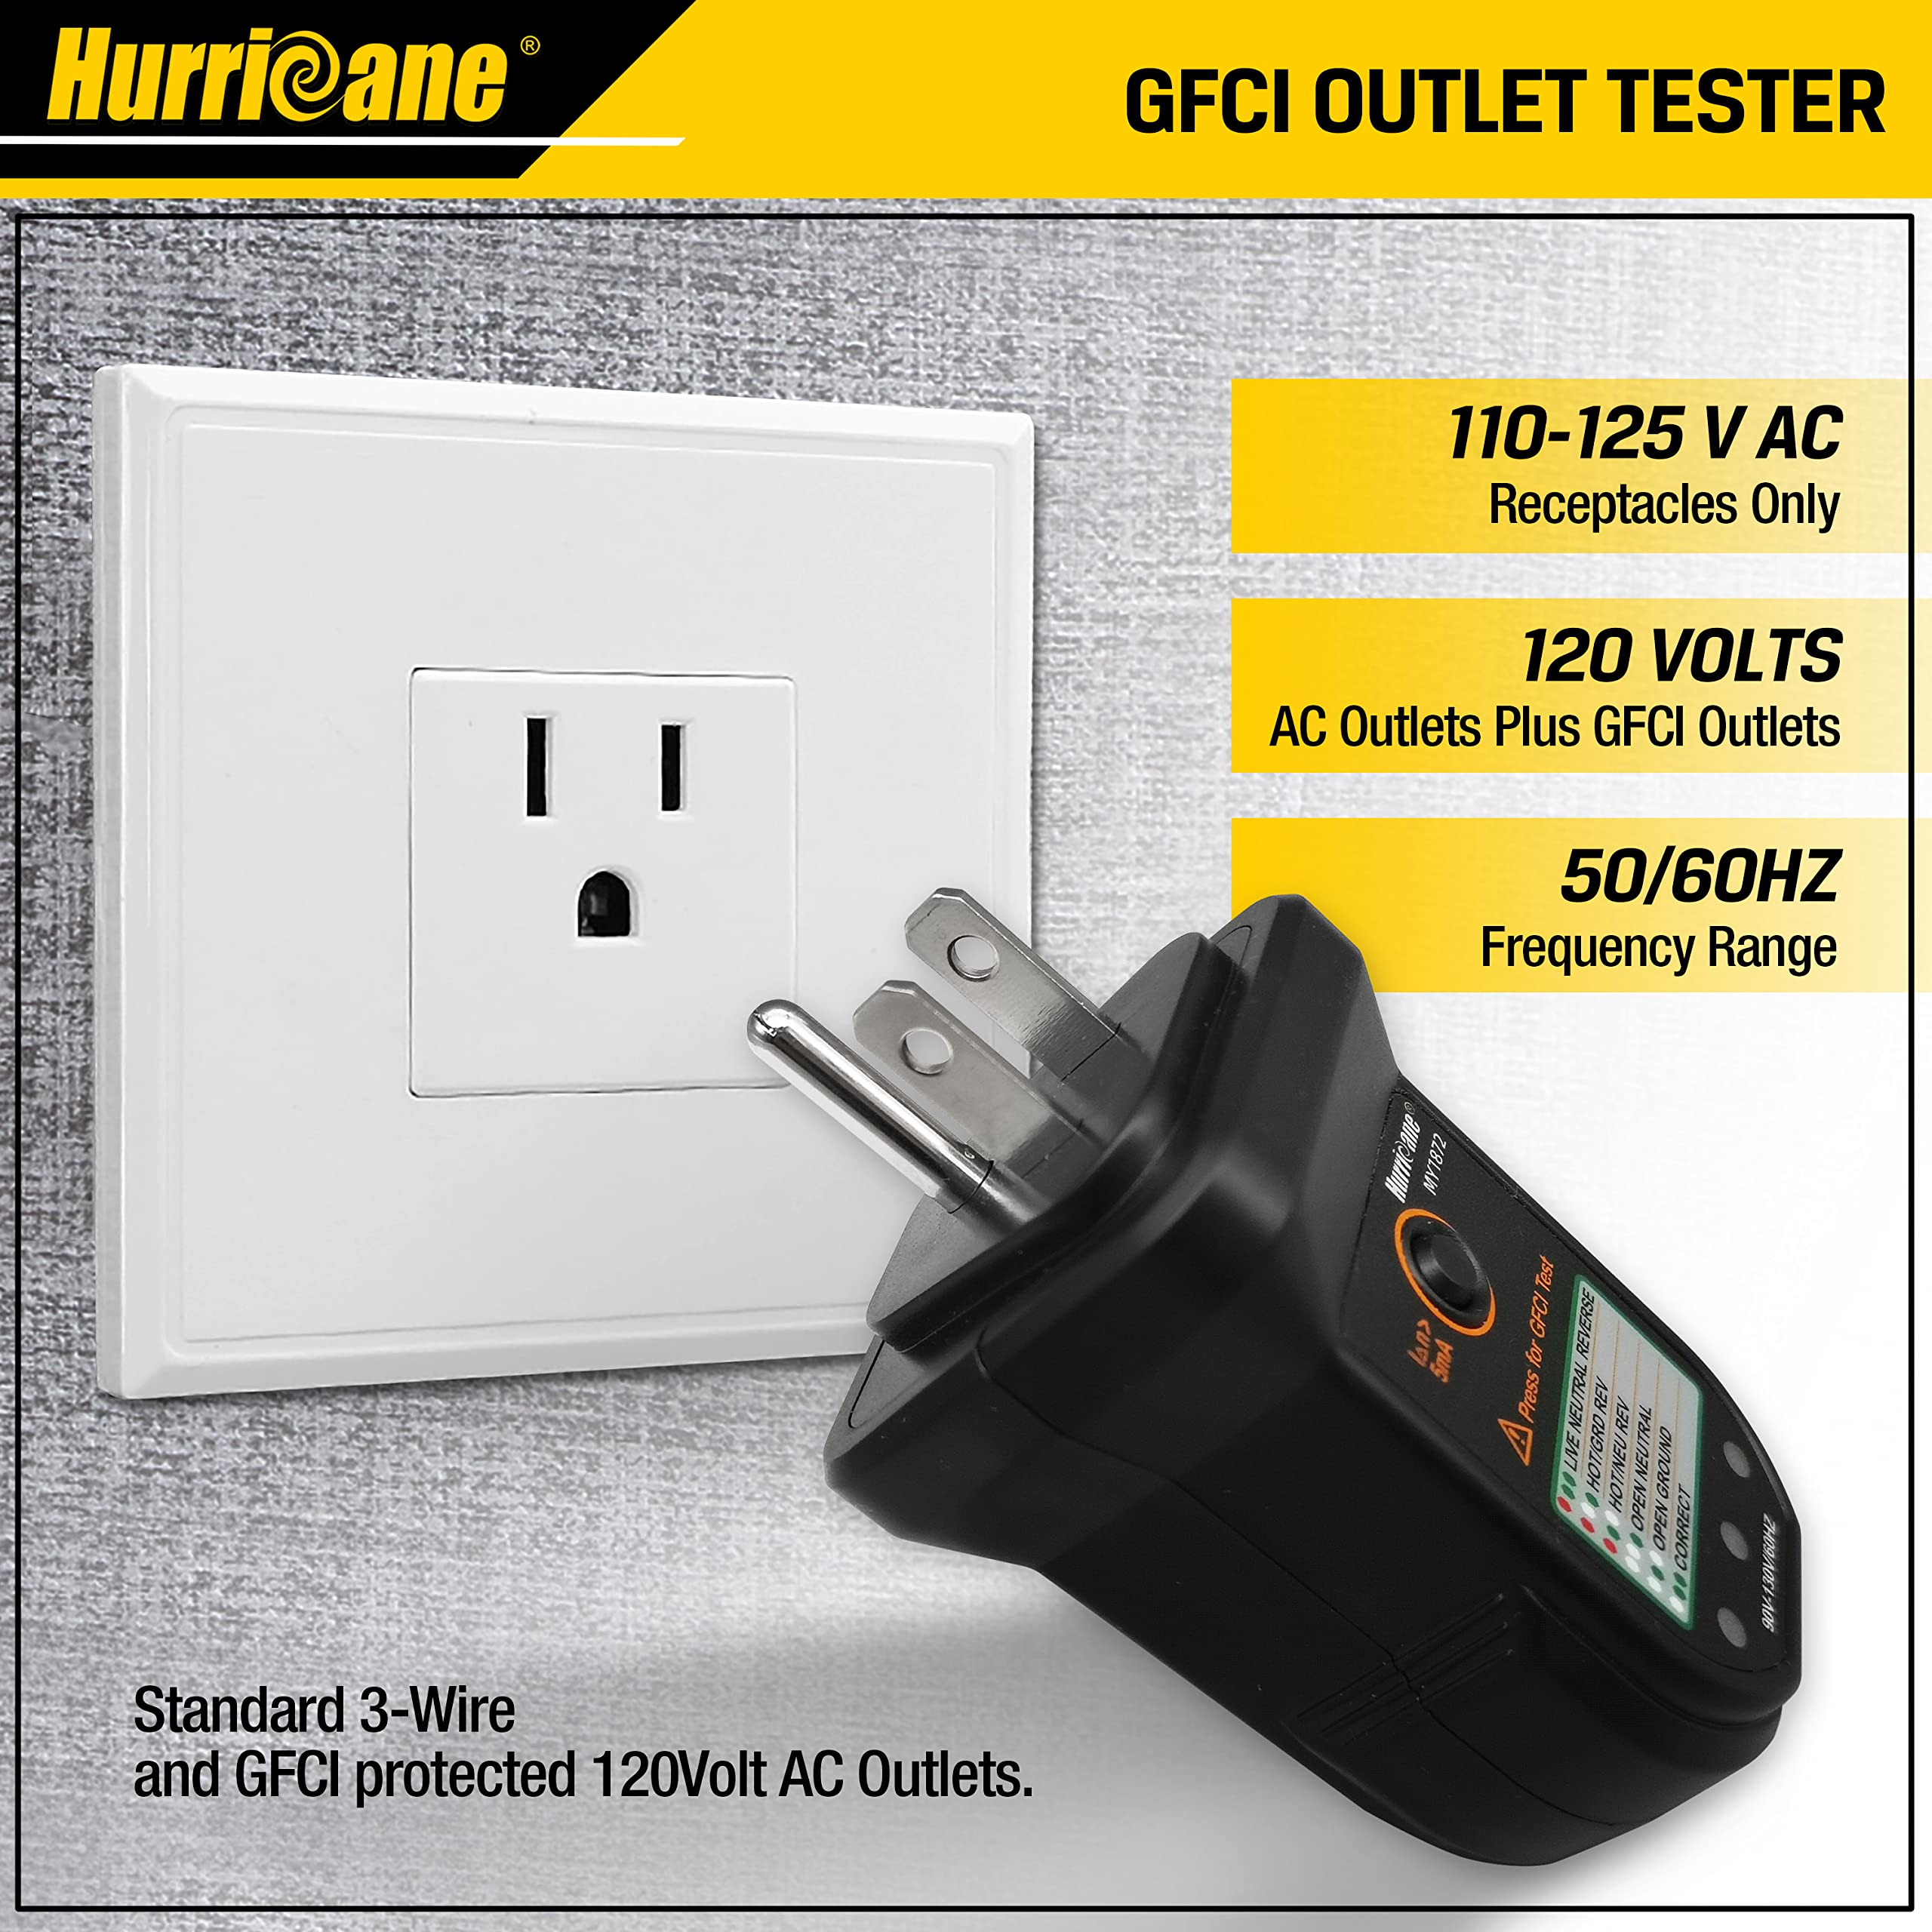 HURRICANE Non-Contact Voltage Tester and Receptacle Tester Kit, Electrical Socket Voltage Tester/12-1000V AC Voltage Detector Pen, and GFCI Outlet Tester/Receptacle Tester for Standard 3-Wire 120V